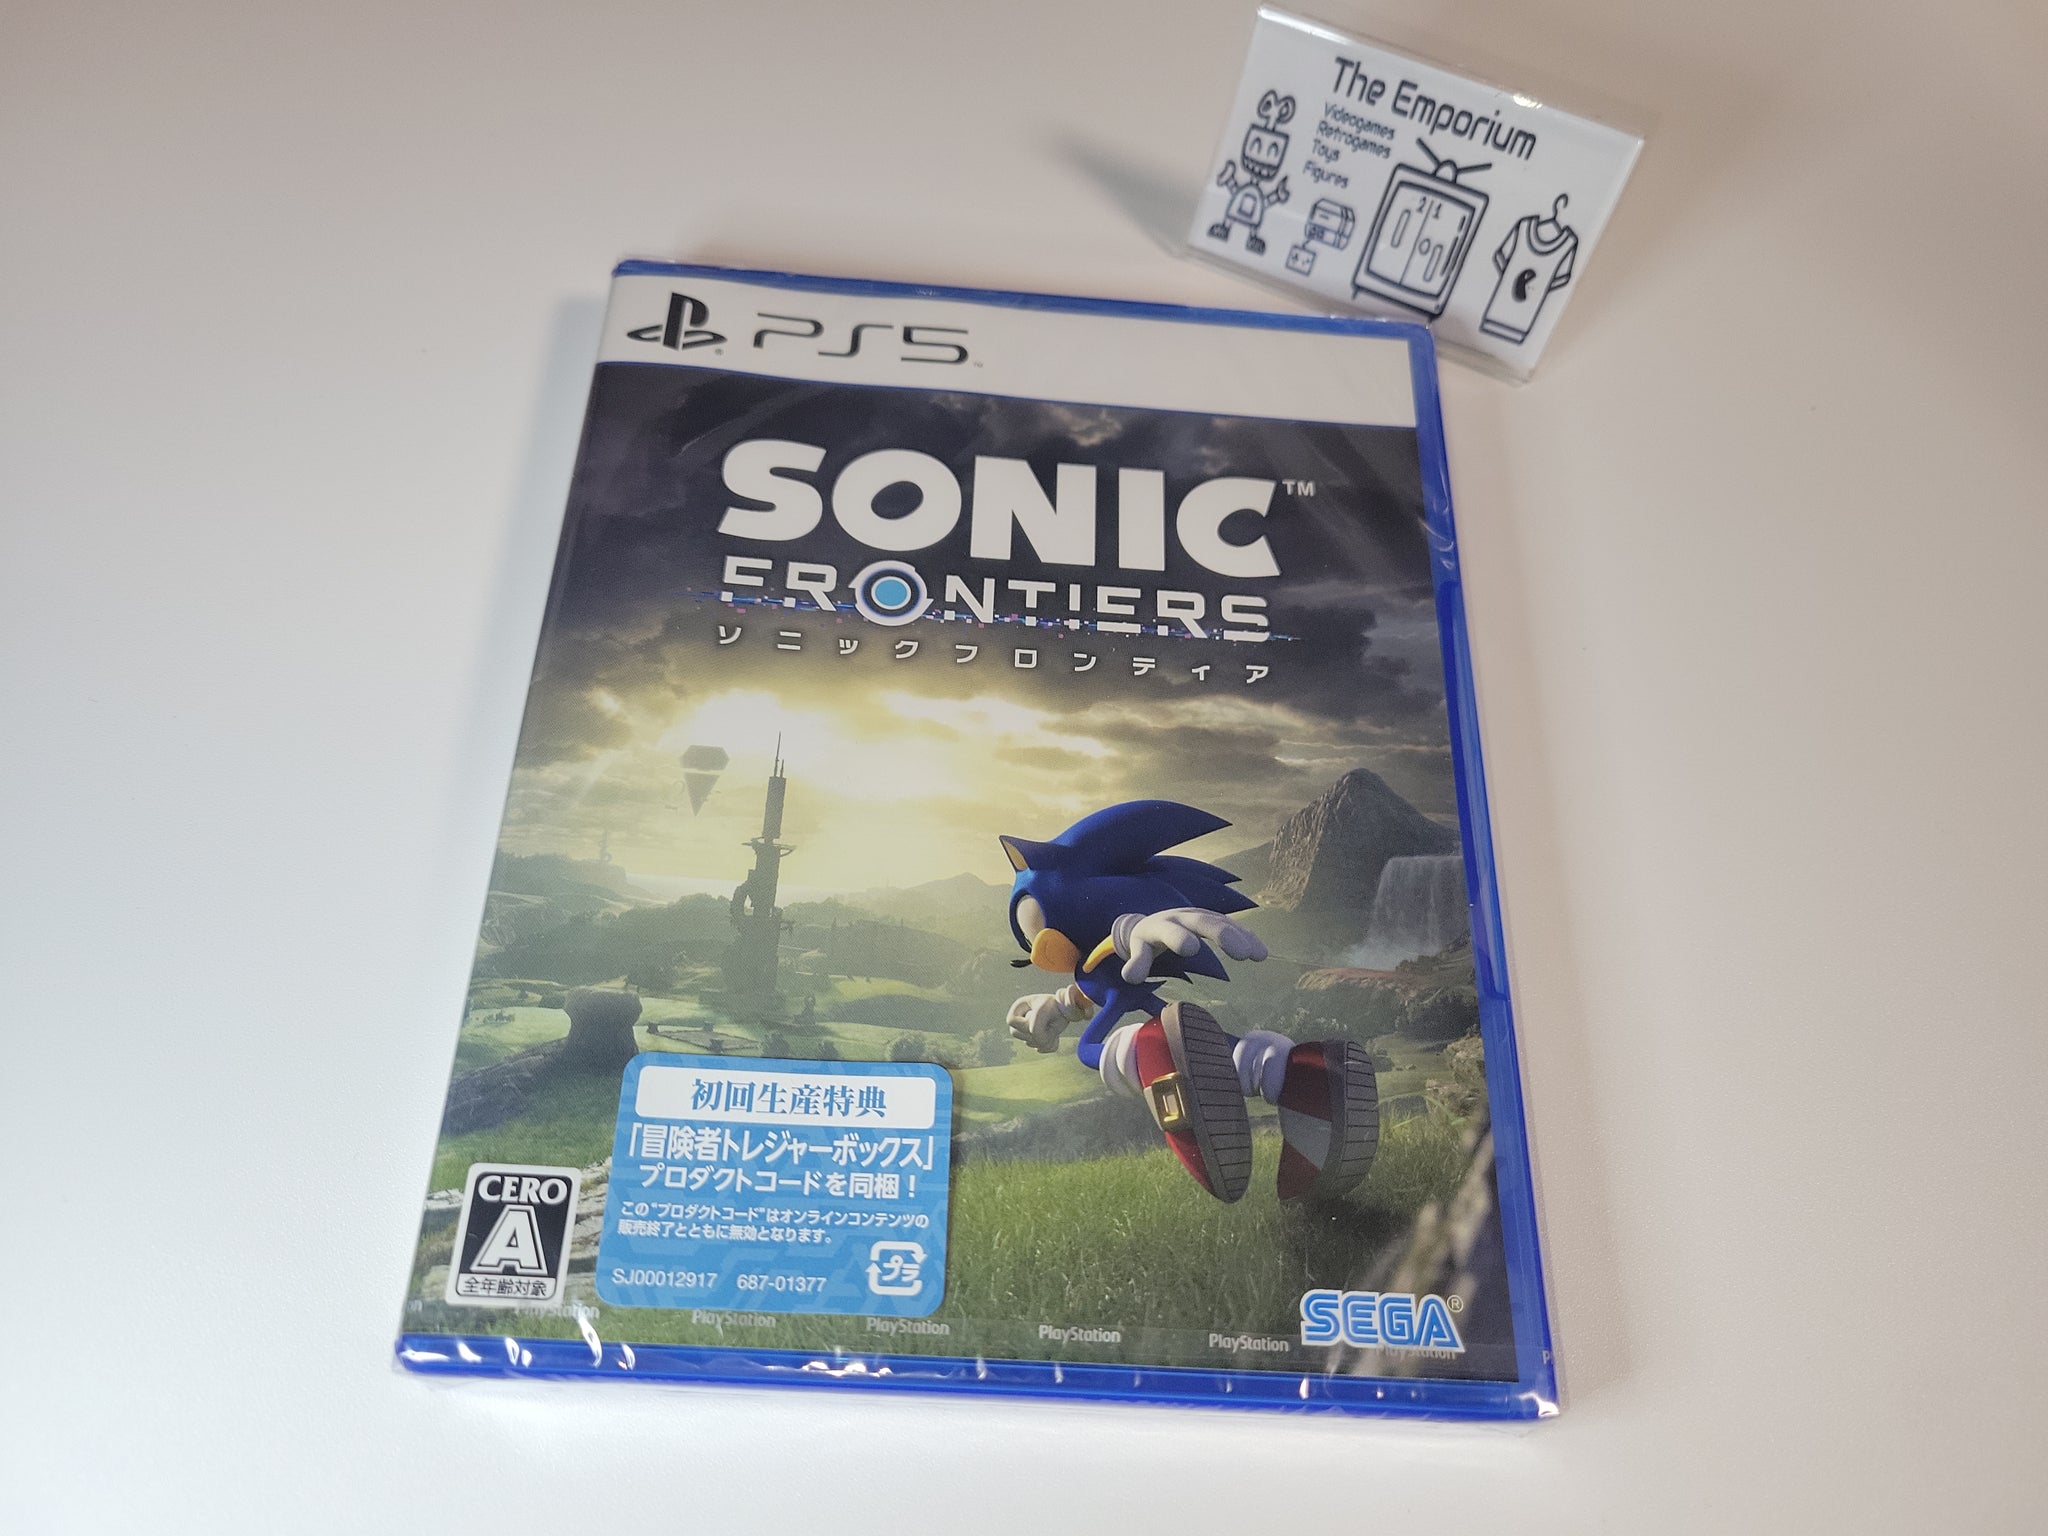 Sonic Frontiers - Sony PS5 Playstation 5 – The Emporium RetroGames and Toys